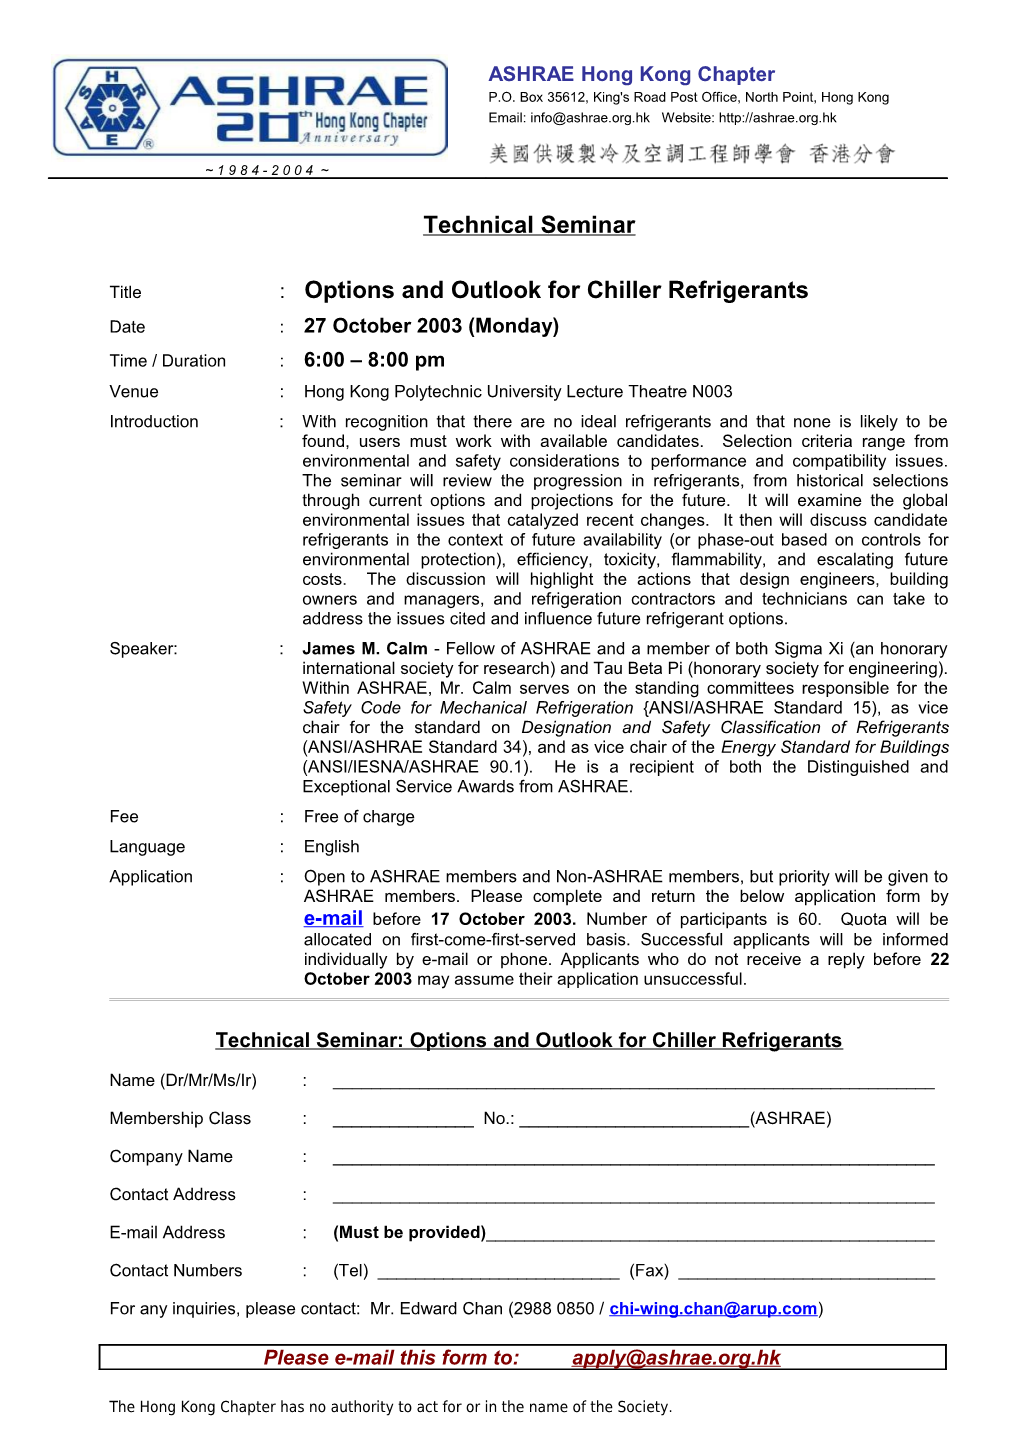 Title : Options and Outlook for Chiller Refrigerants